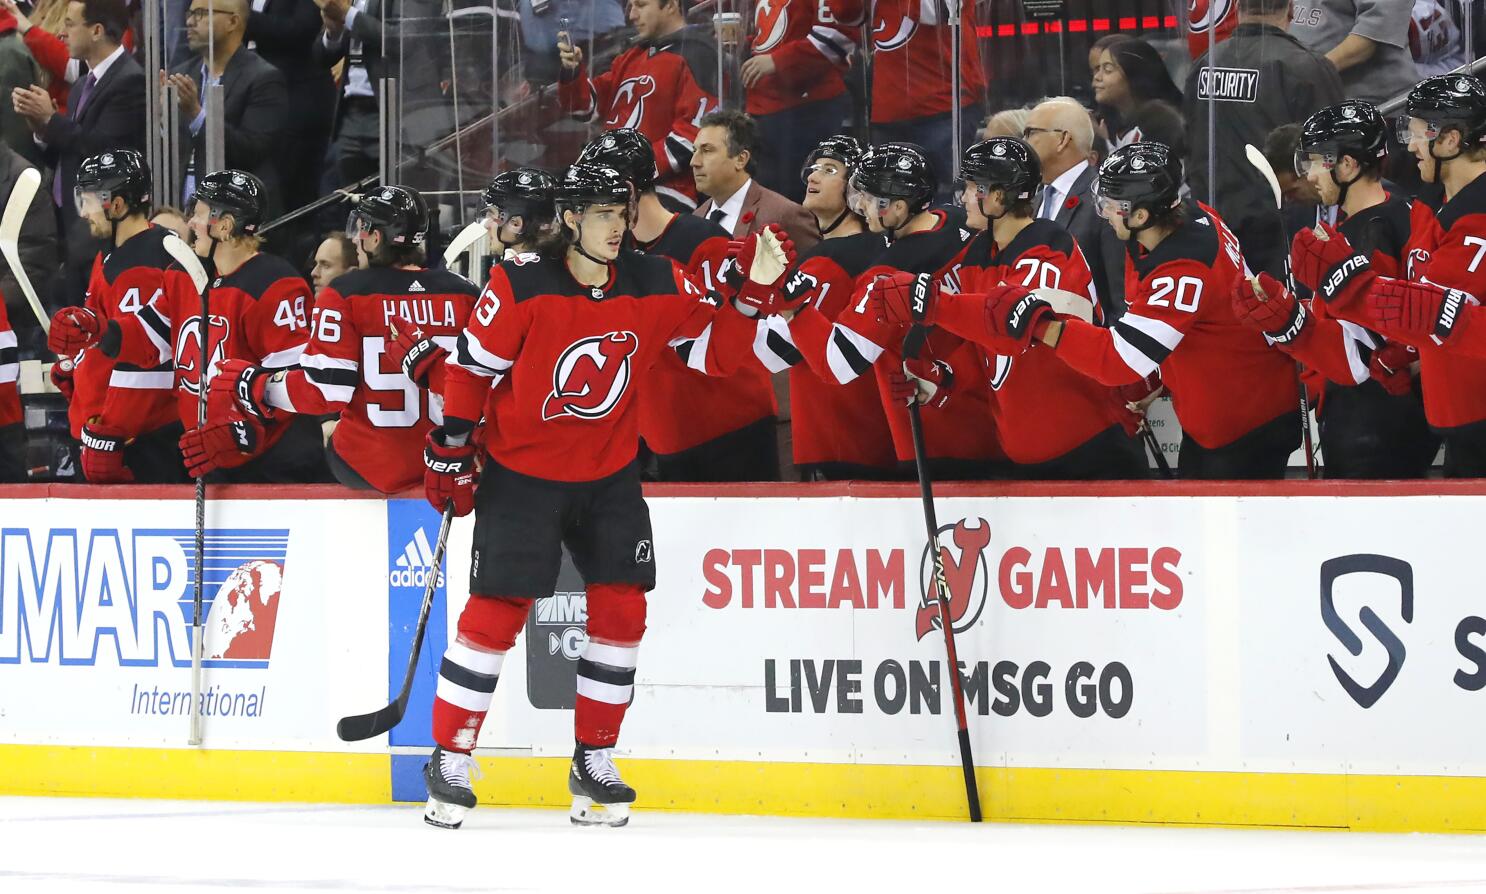 Devils beat Flames 3-2 on Hischier goal for 7th win in row